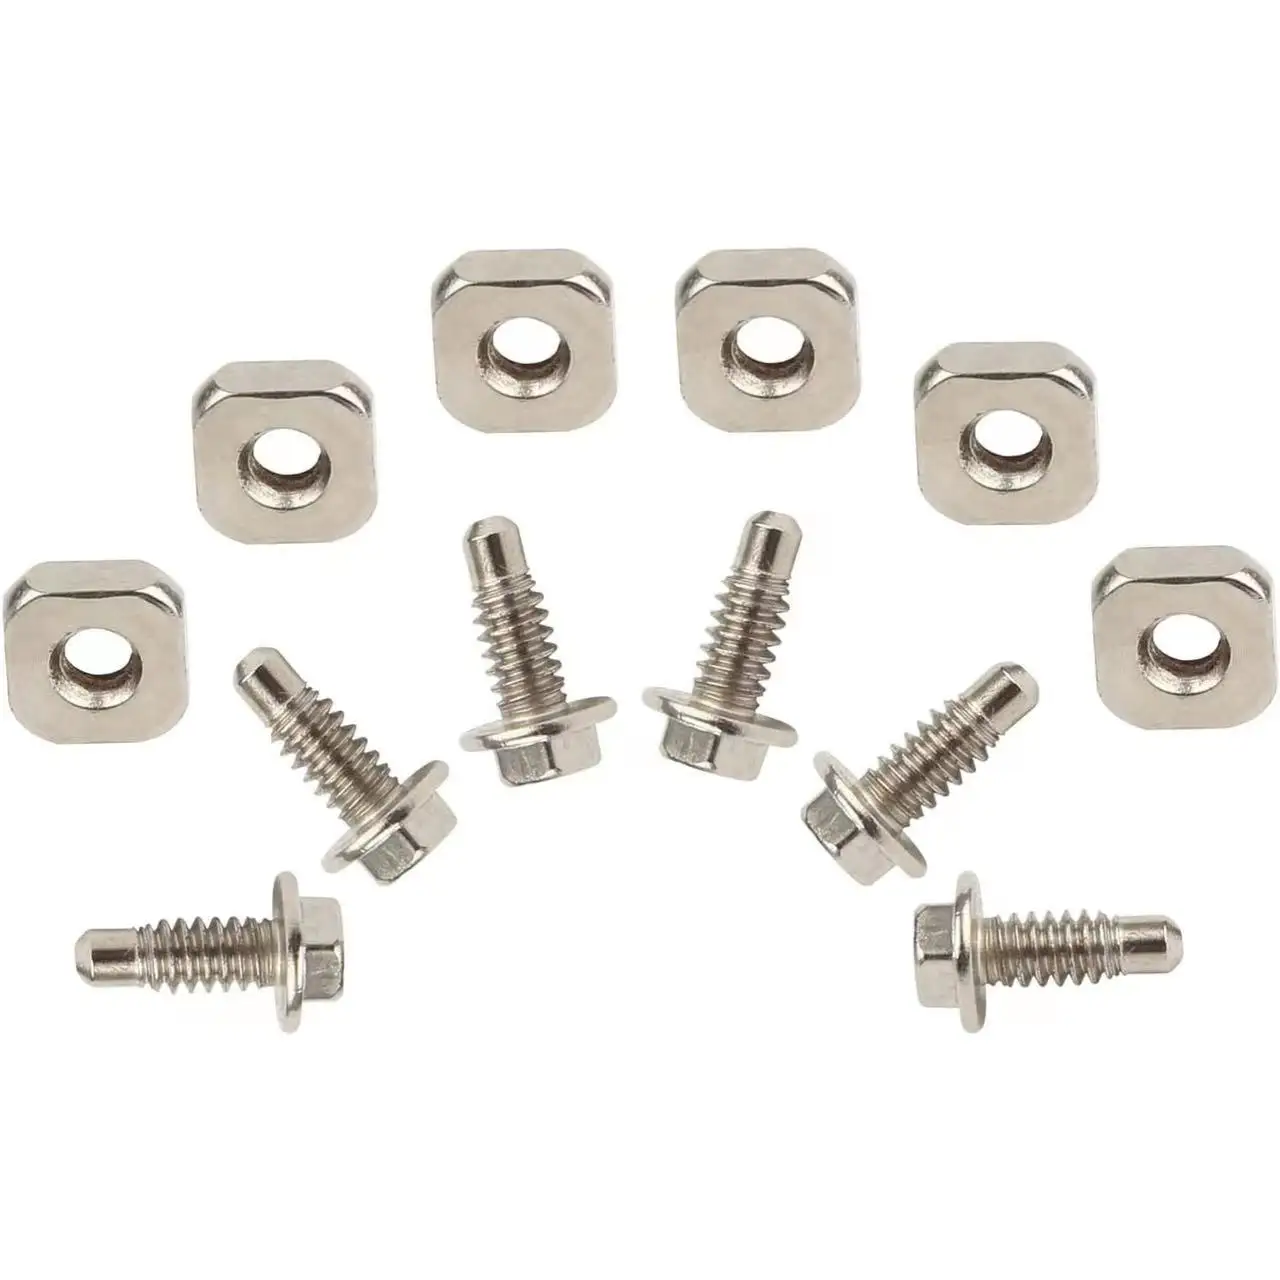 Good Quality Dryer Replacement Parts Compatible with Dryers 279393 Dryer Cord Screw Kit